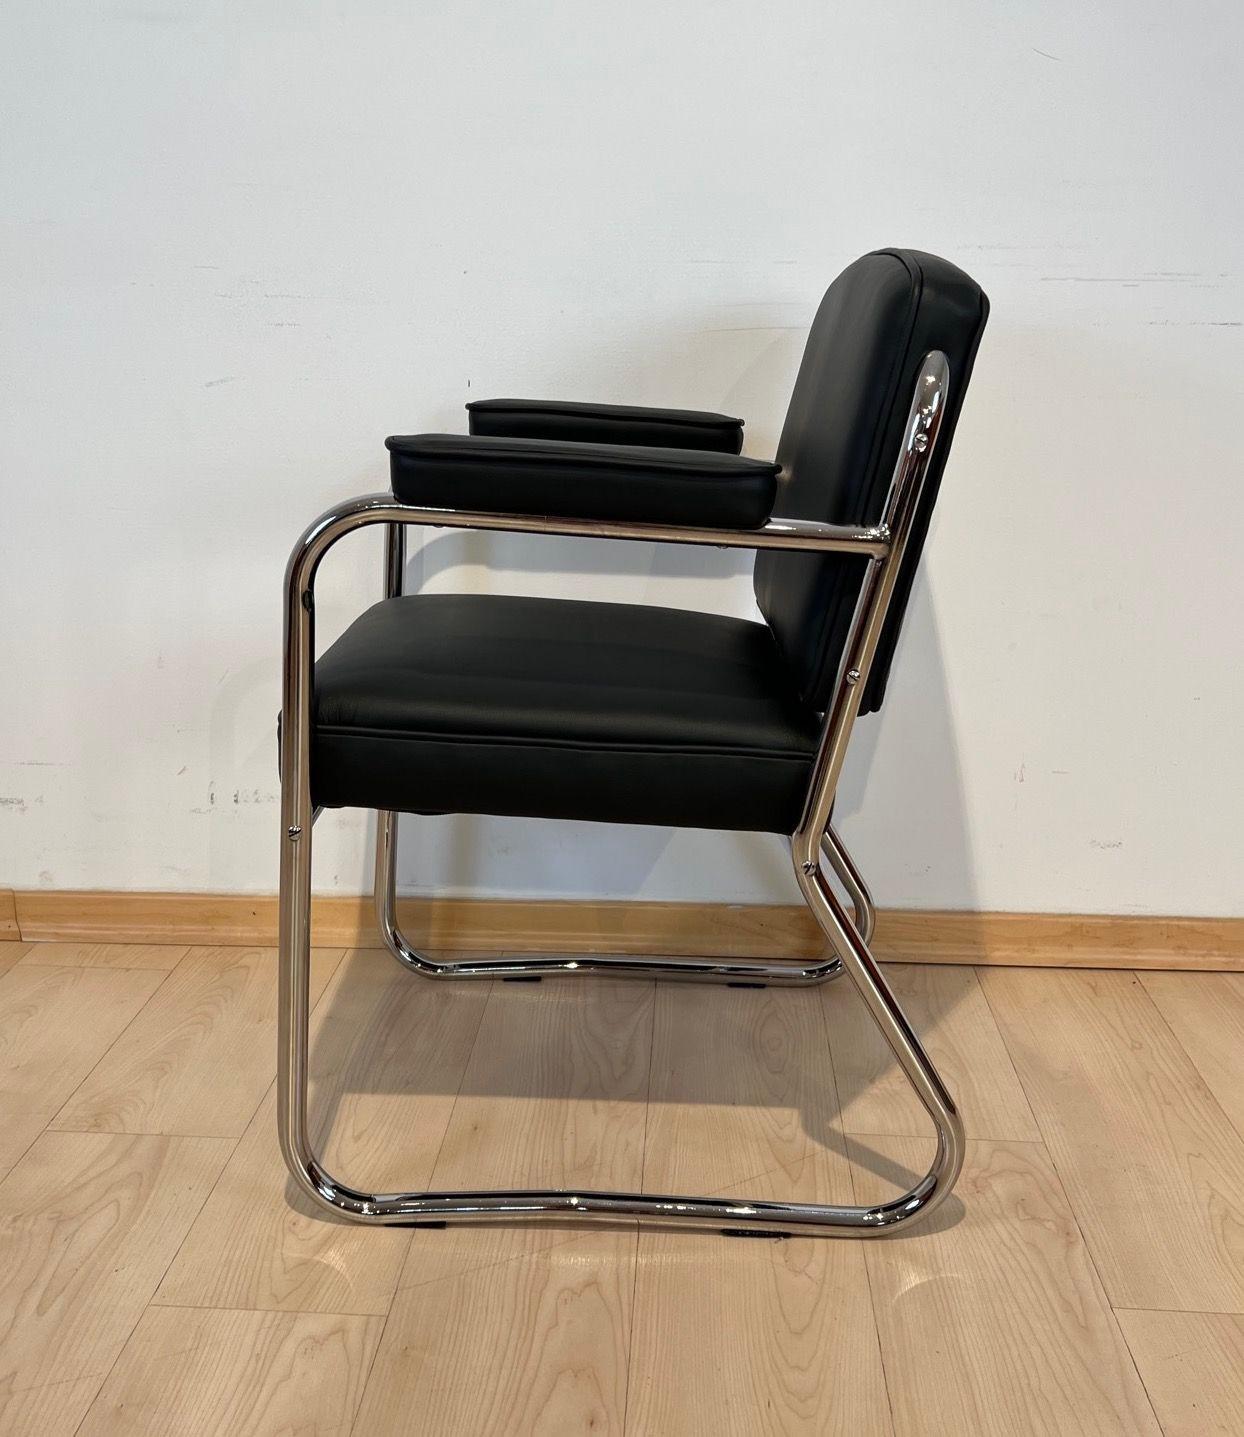 Original, fully restored Bauhaus armchair or desk chair.
Tubular steel frame, newly chrome-plated and polished. Seat, back and armrests have been re-upholstered in black/dark gray leather.
Dimensions:
H 83 cm x W 57 cm x D 60 cm x Seat-H 50 cm
H